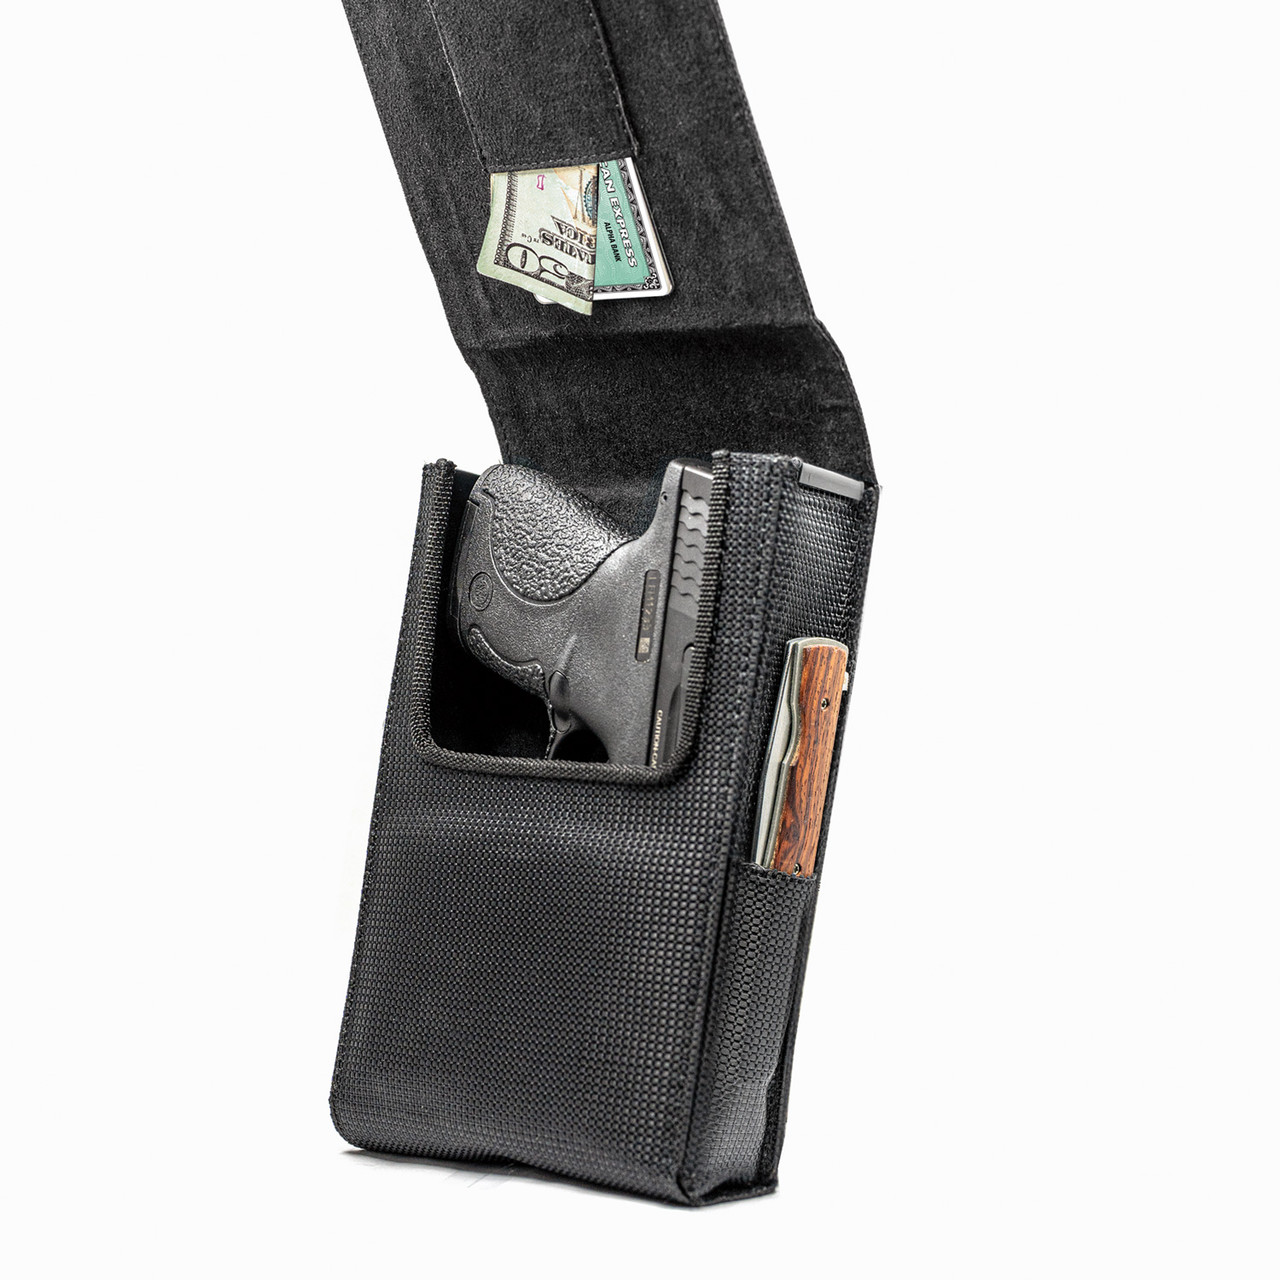 The M&P 9c Perfect Holster